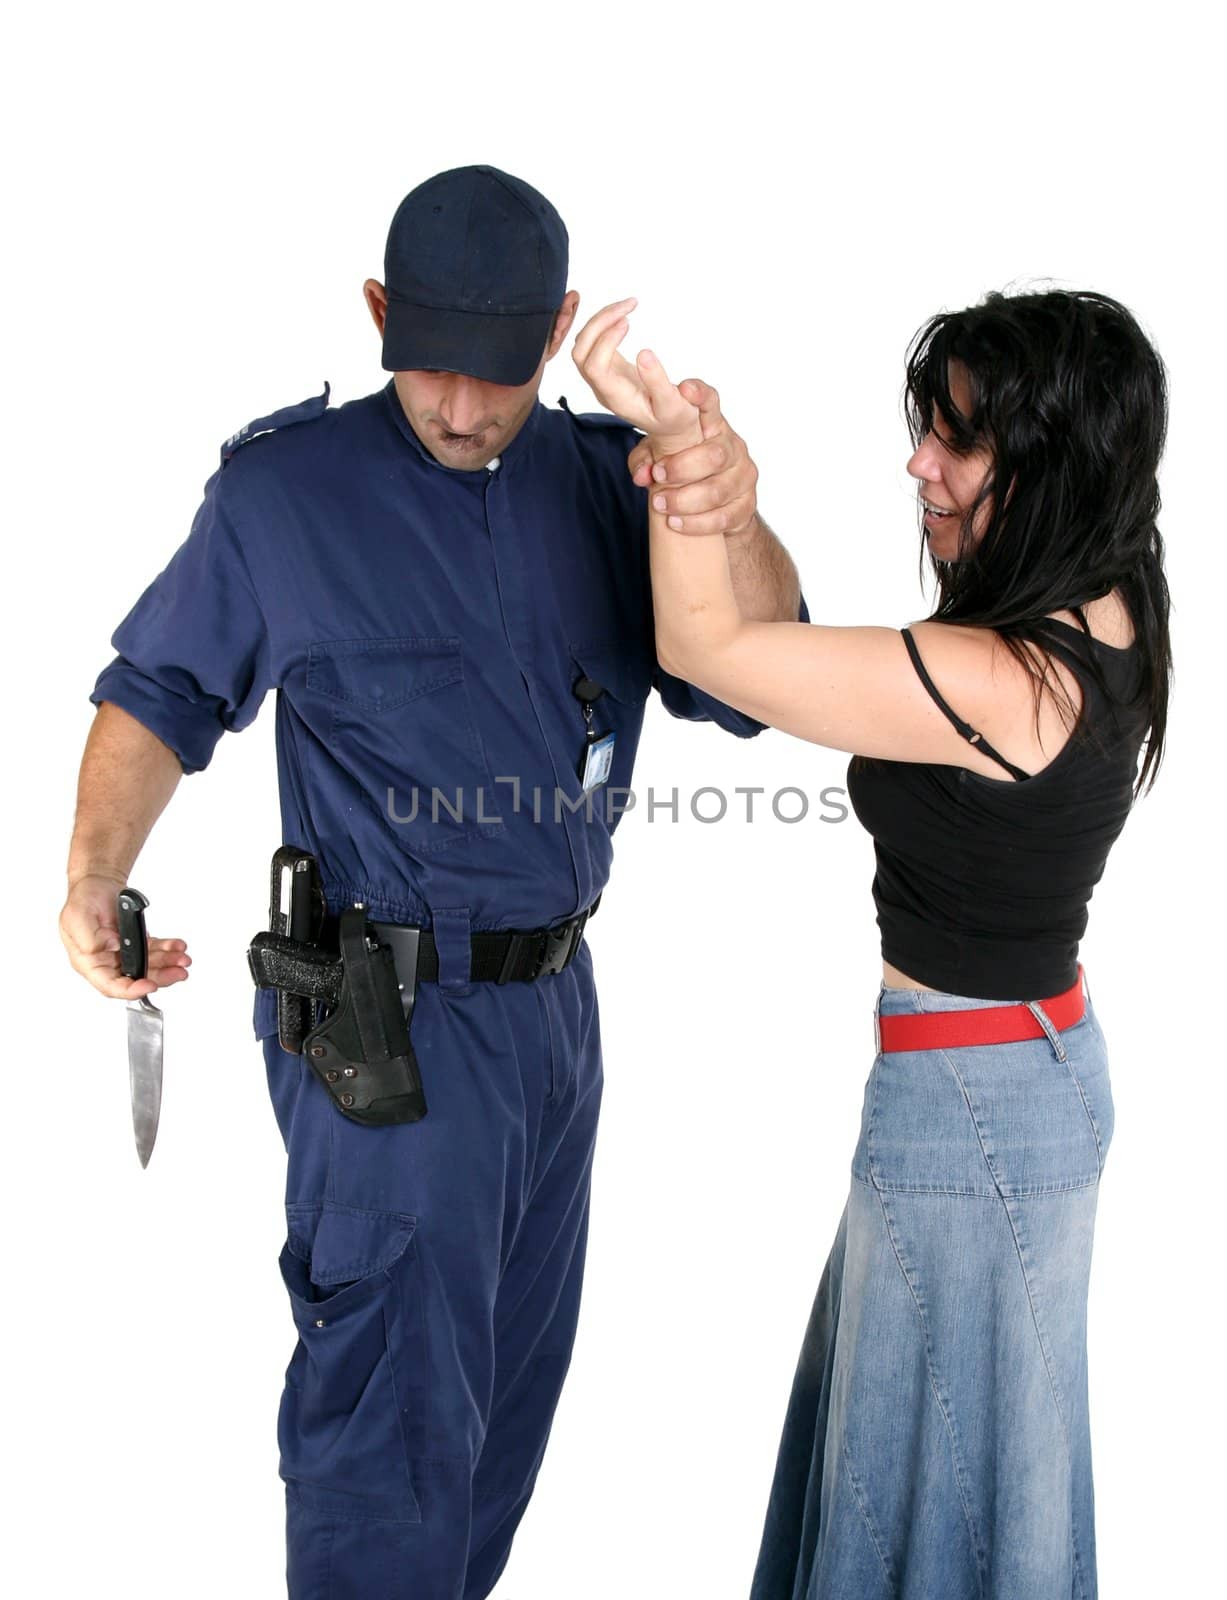 Officer disarms a weapon from a suspected criminal by lovleah